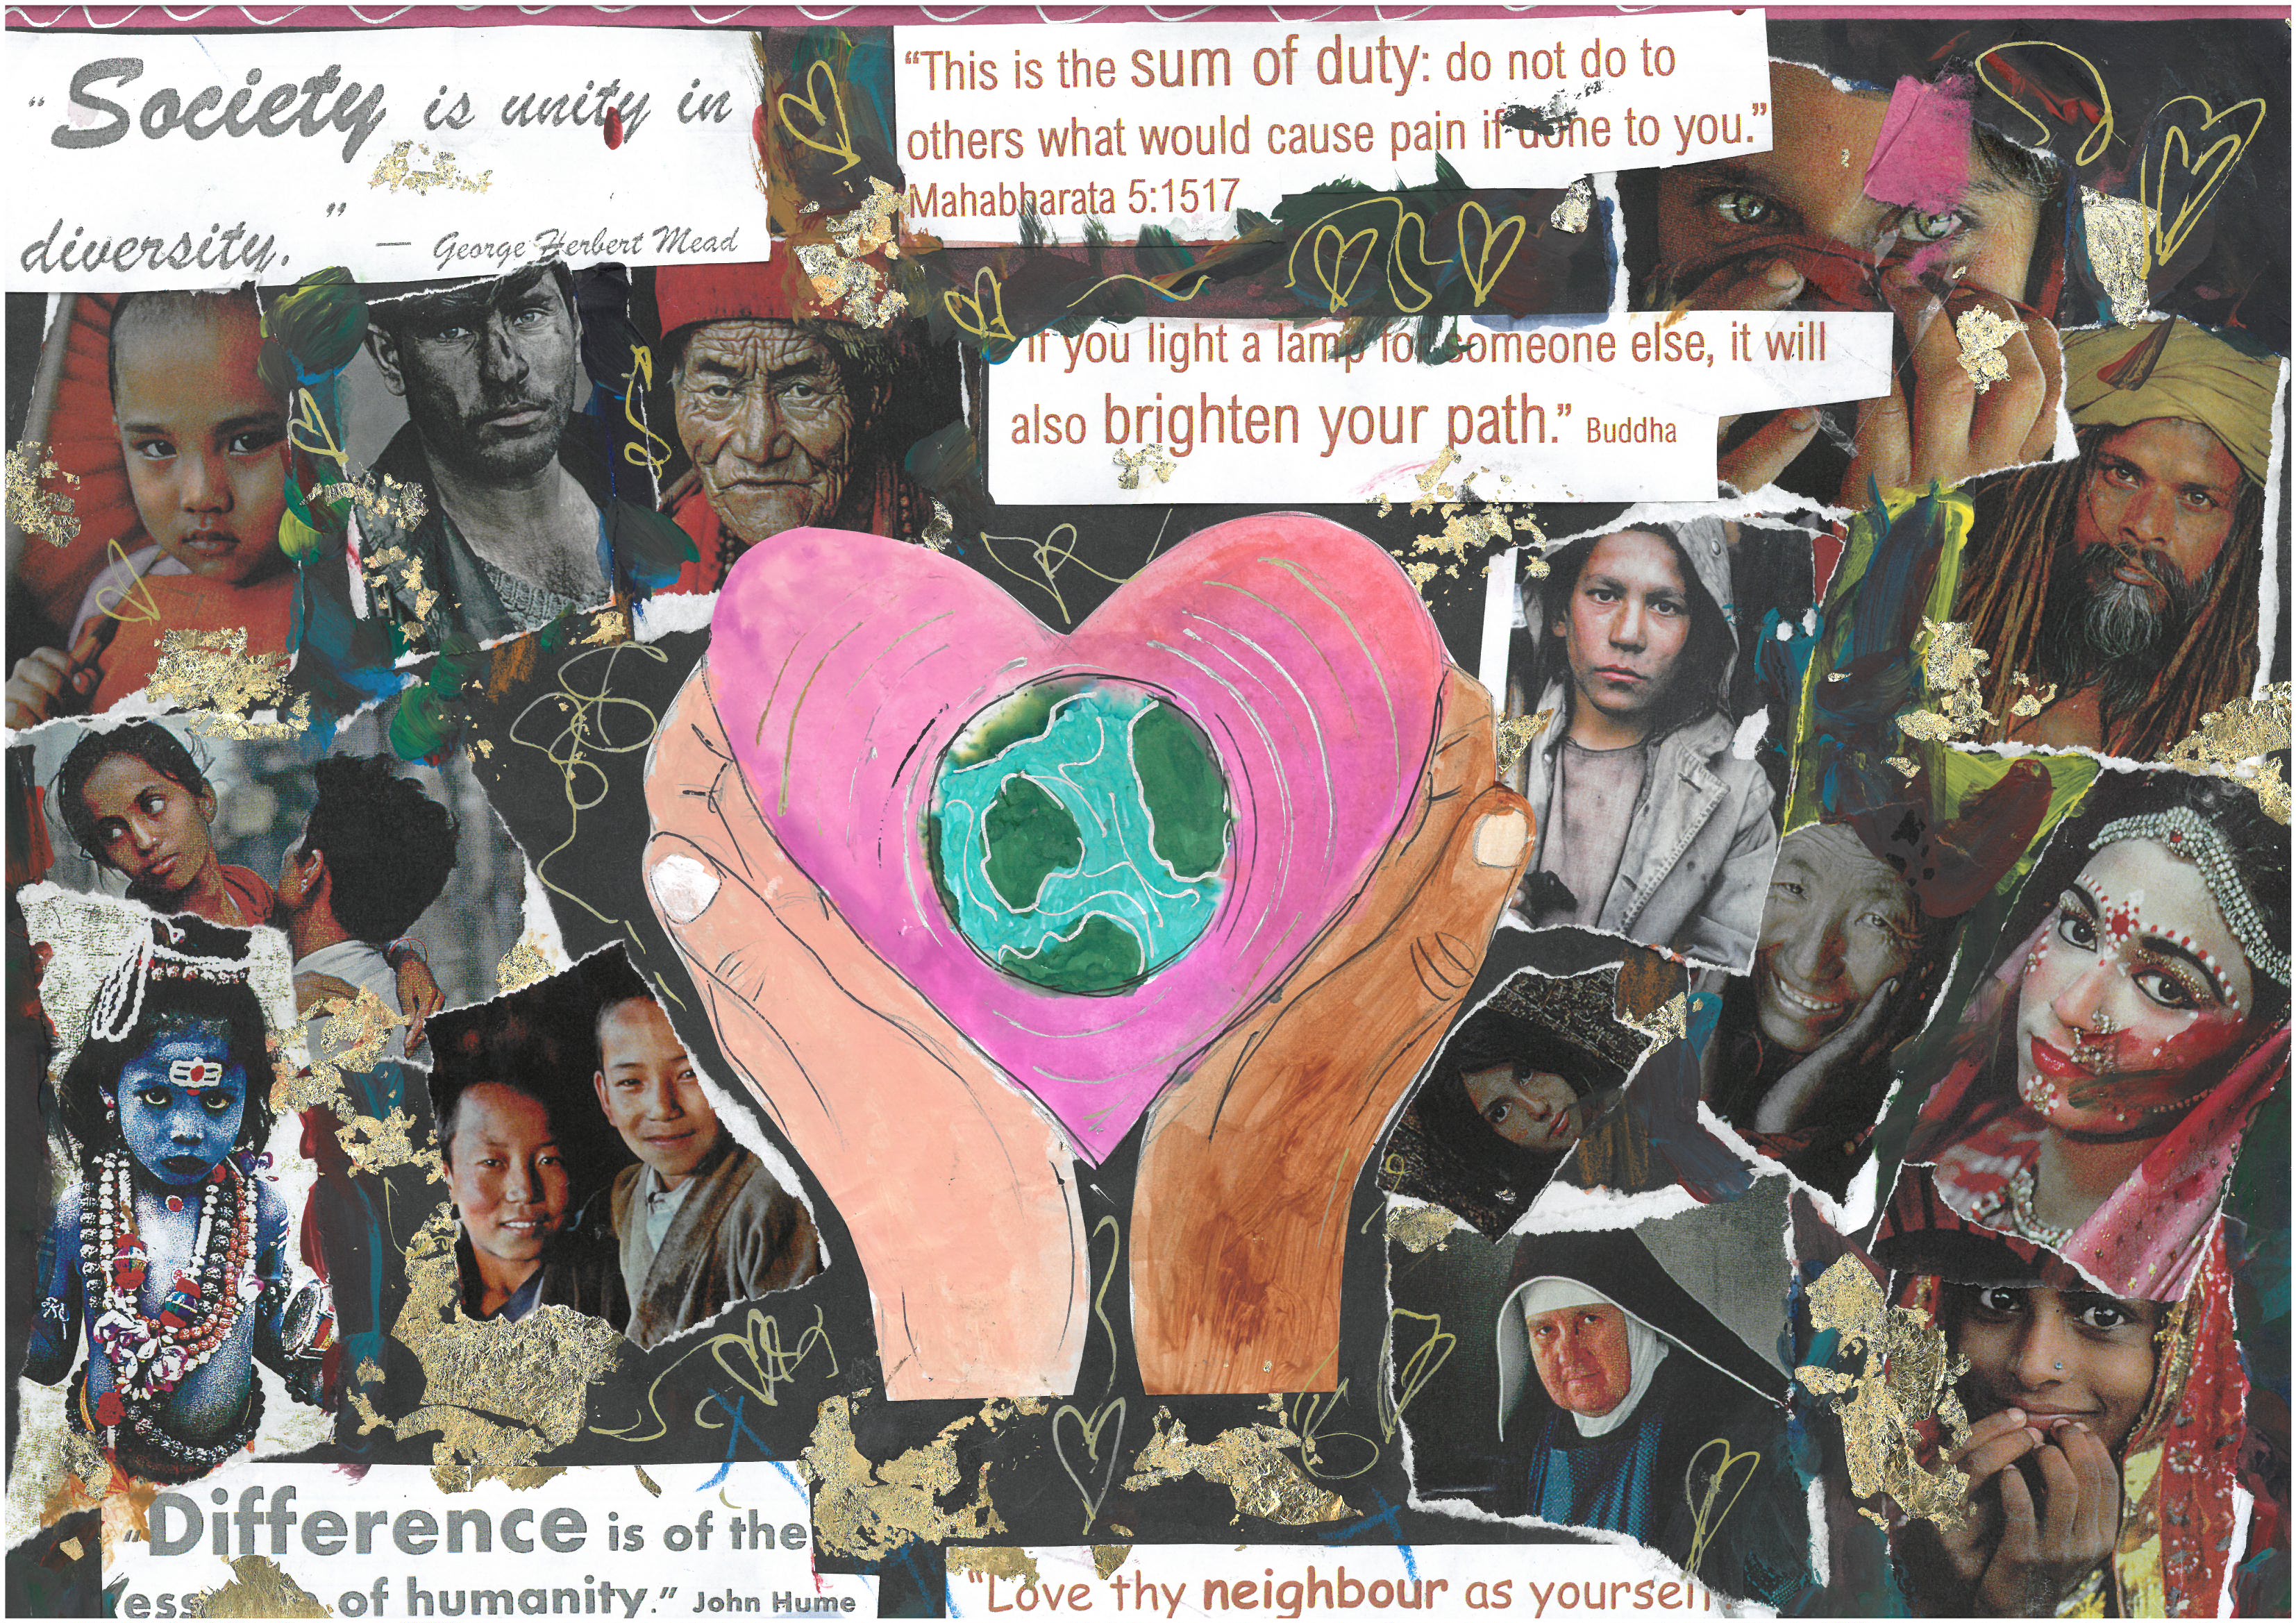 Emilia's artwork which pictures a pink heart surrounding a globe being held by two different hands and pictures of lots of different people alongside bible quotes.